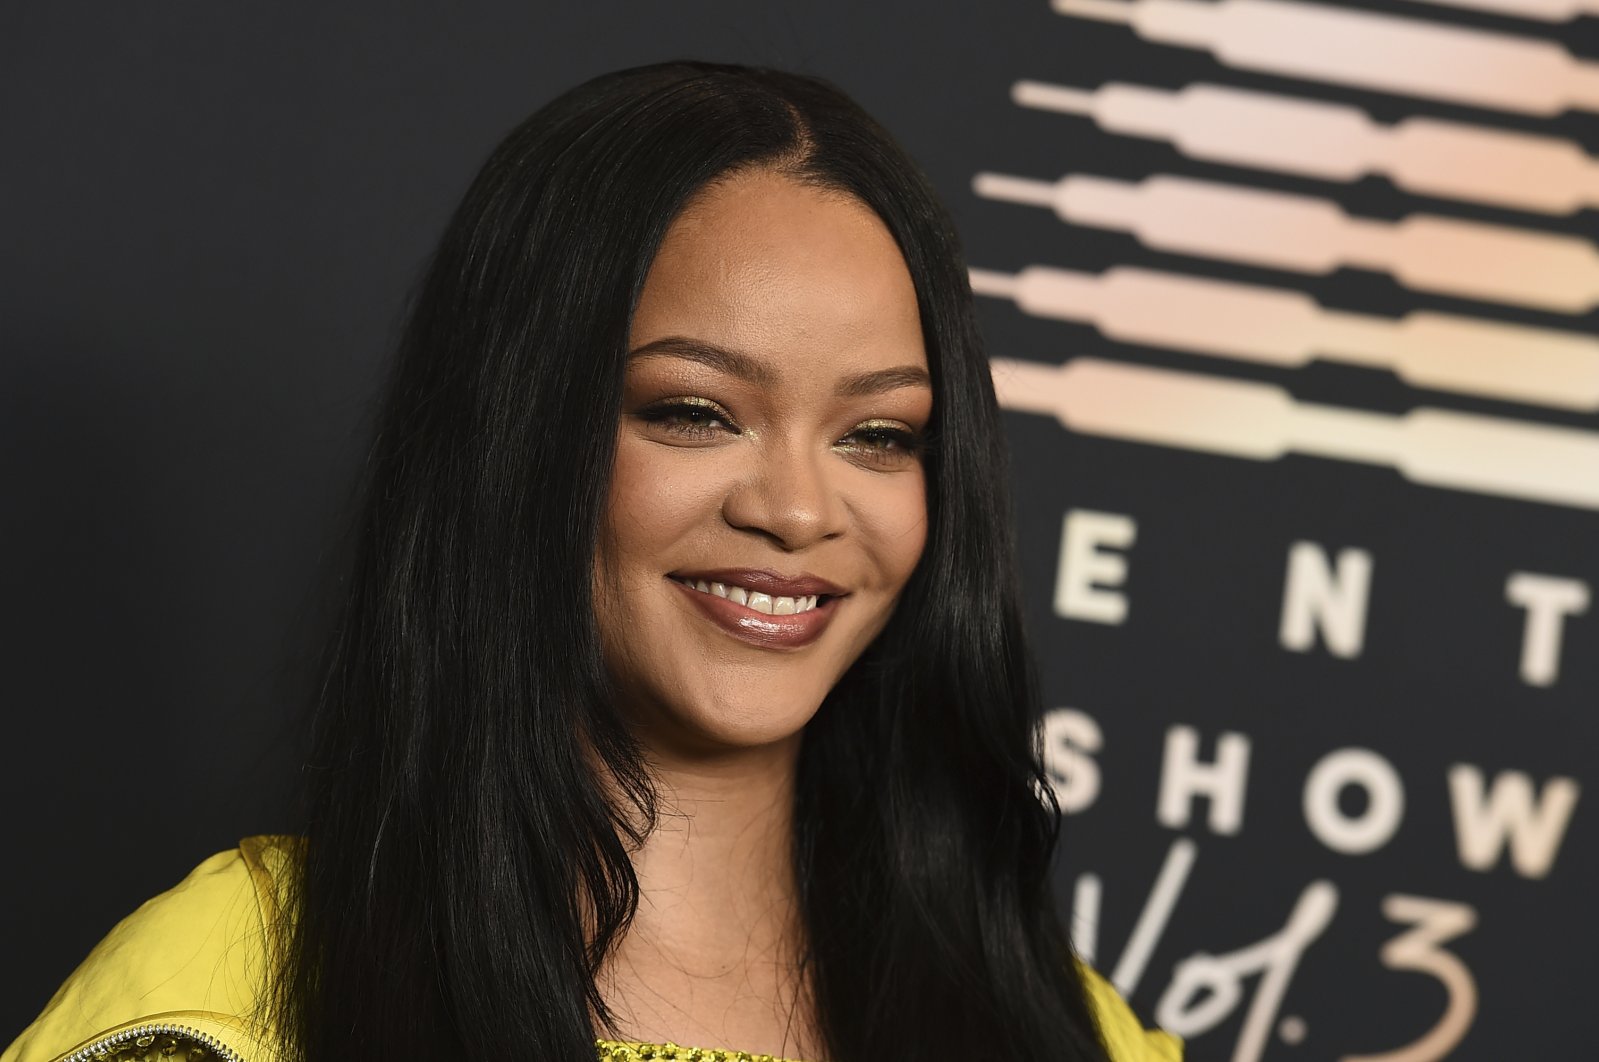 Rihanna attends an event for her lingerie line Savage X Fenty at the Westin Bonaventure Hotel in Los Angeles, U.S., Aug. 28, 2021. (Photo via AP)